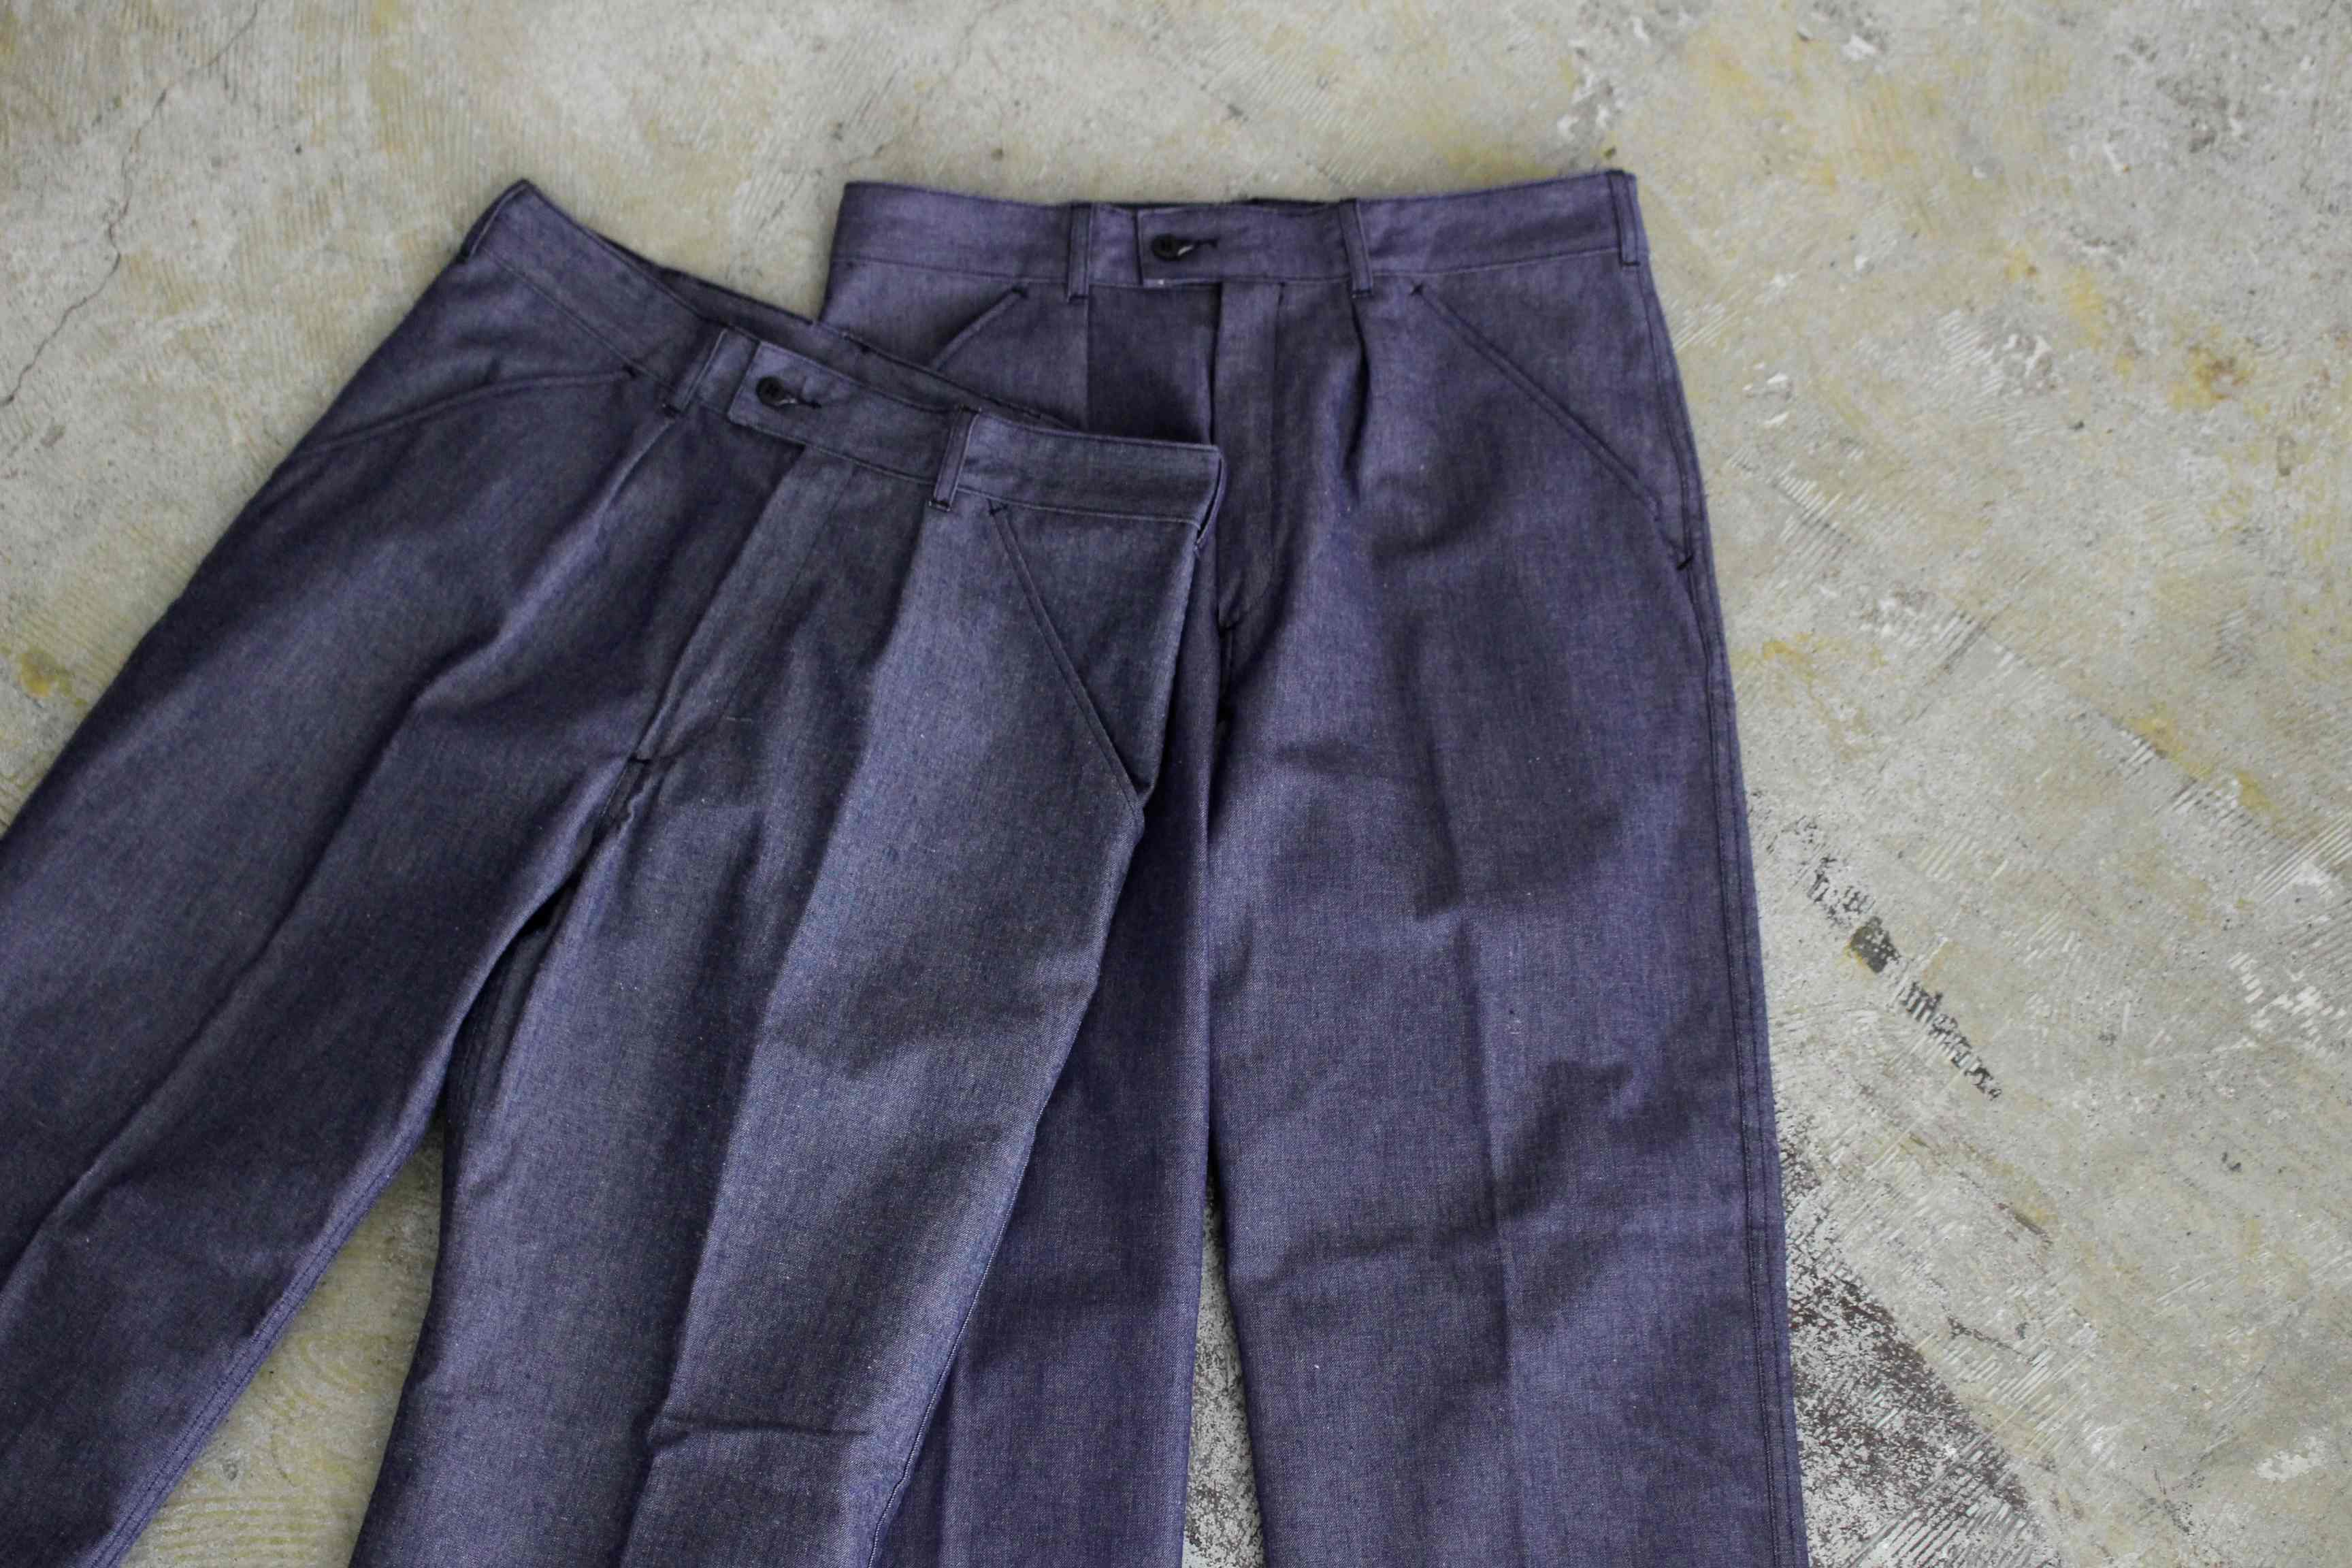 french navy denim trousers